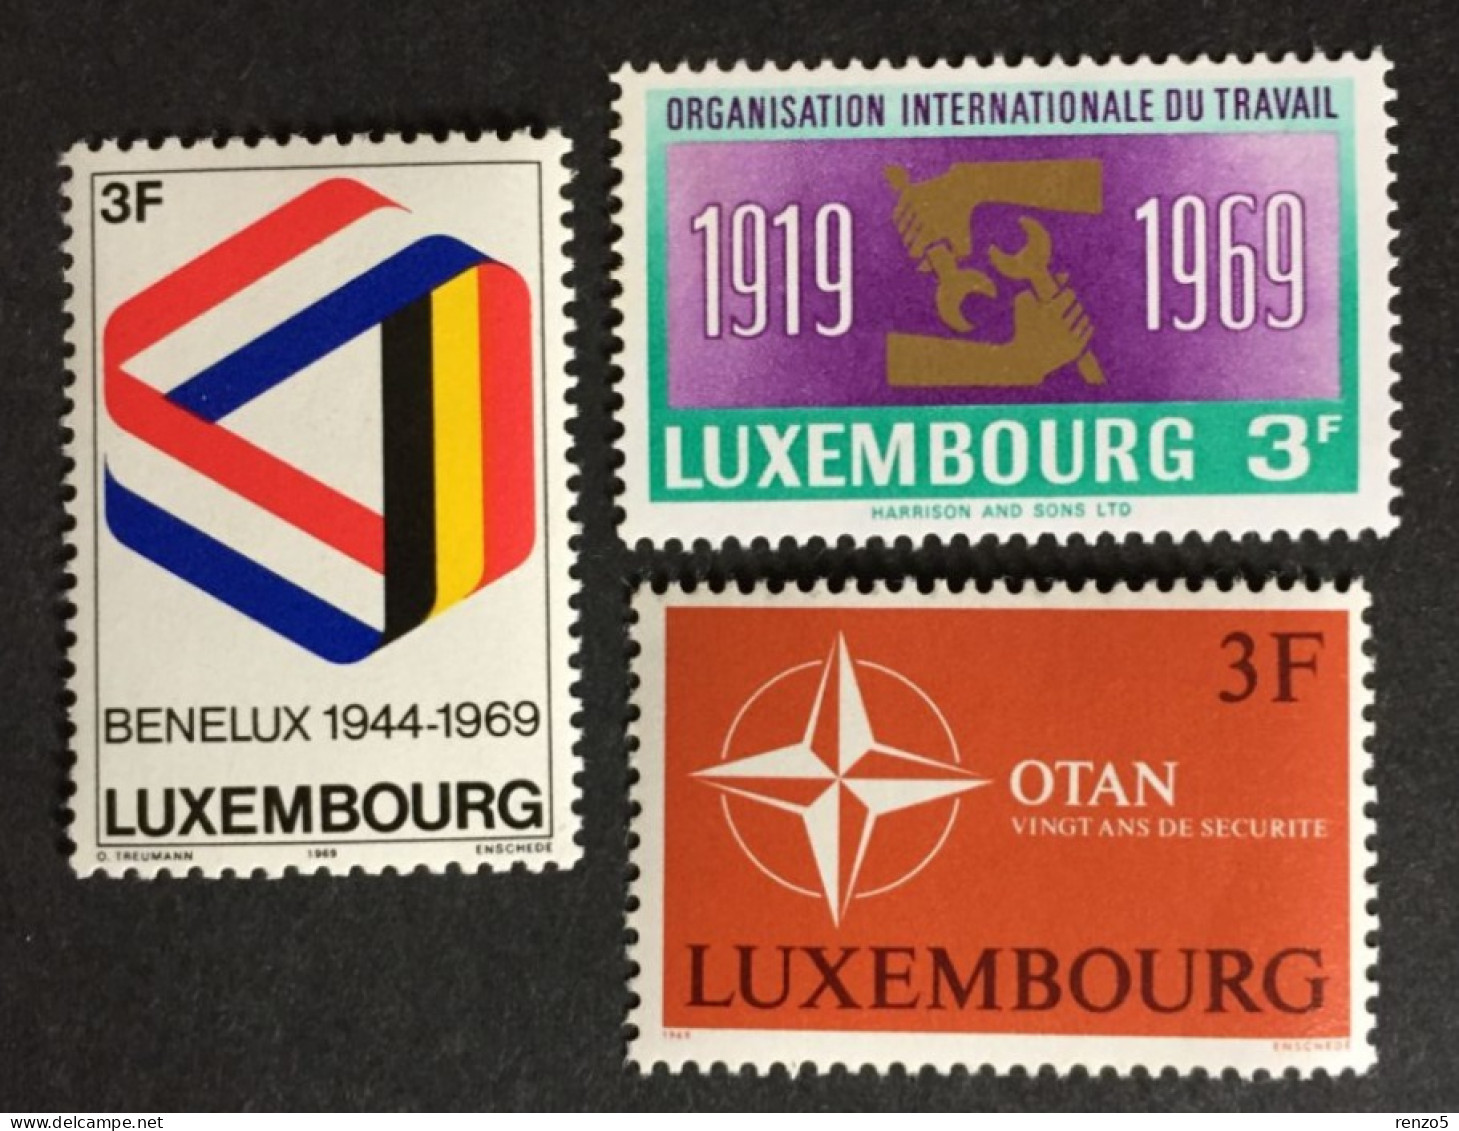 1969 Luxembourg - 25th Benelux Customs Union, 50th Ann. Of Labor Organization, 20th Ann. Of The N.A.T.O. - Unused - Ongebruikt